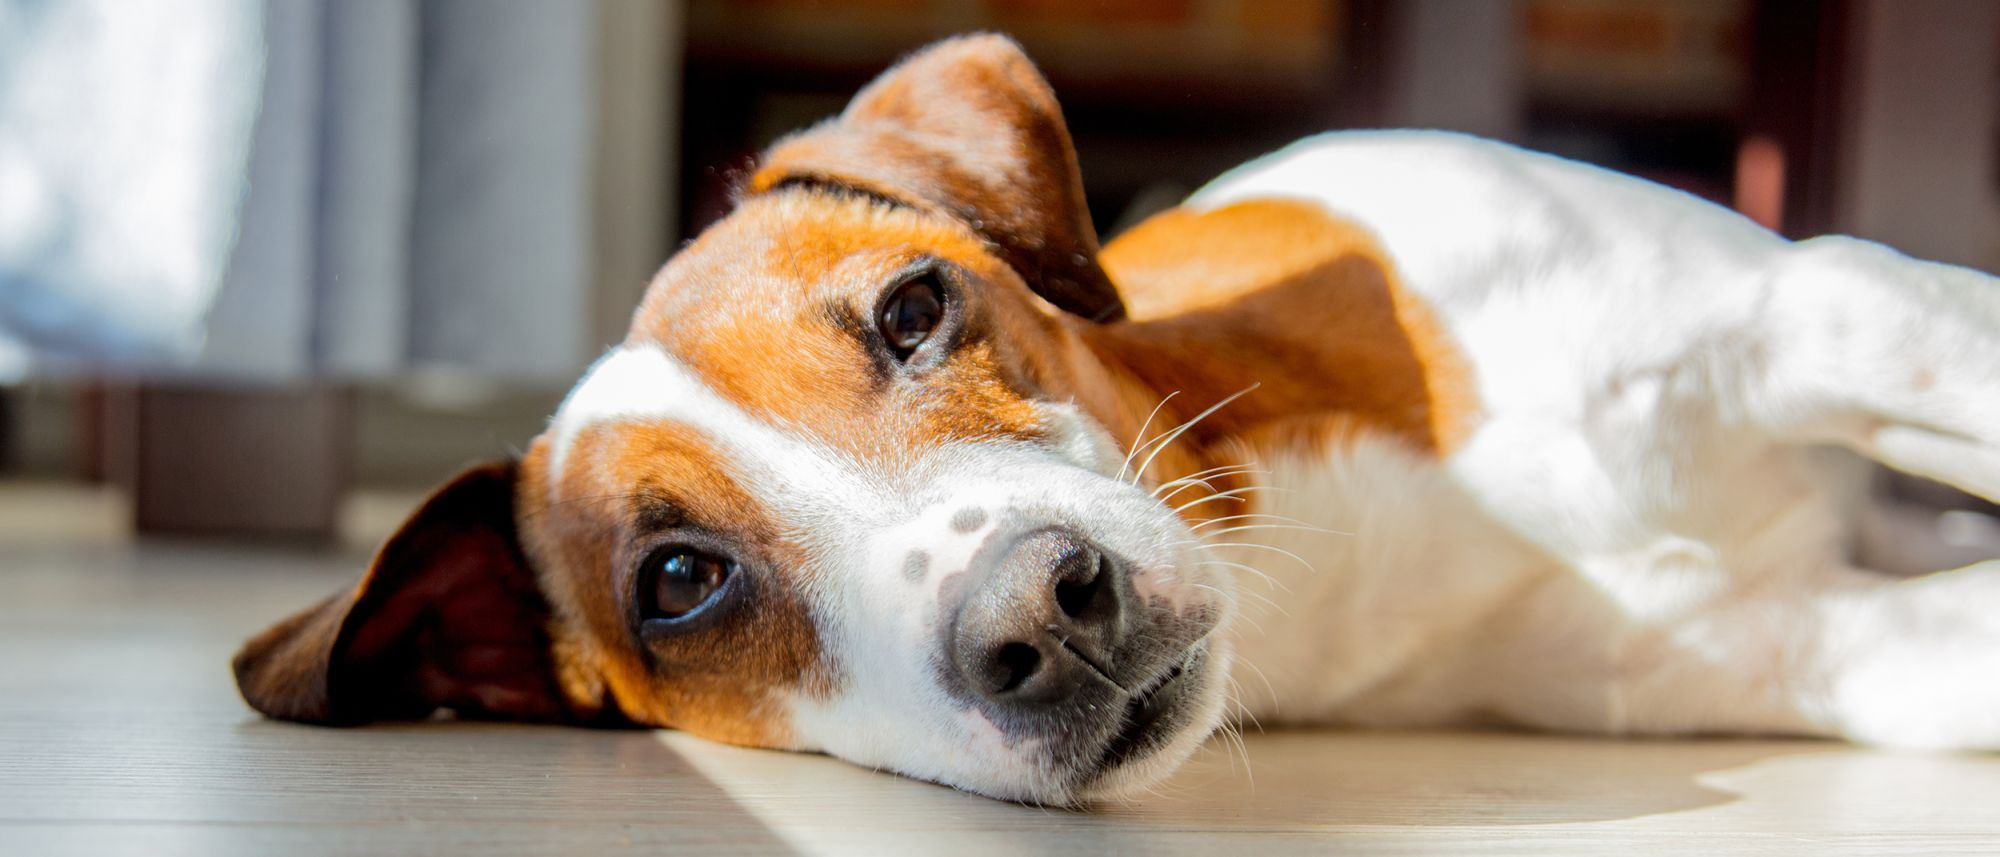 Adult Jack Russell Terrier dog lying down indoors on wooden floor